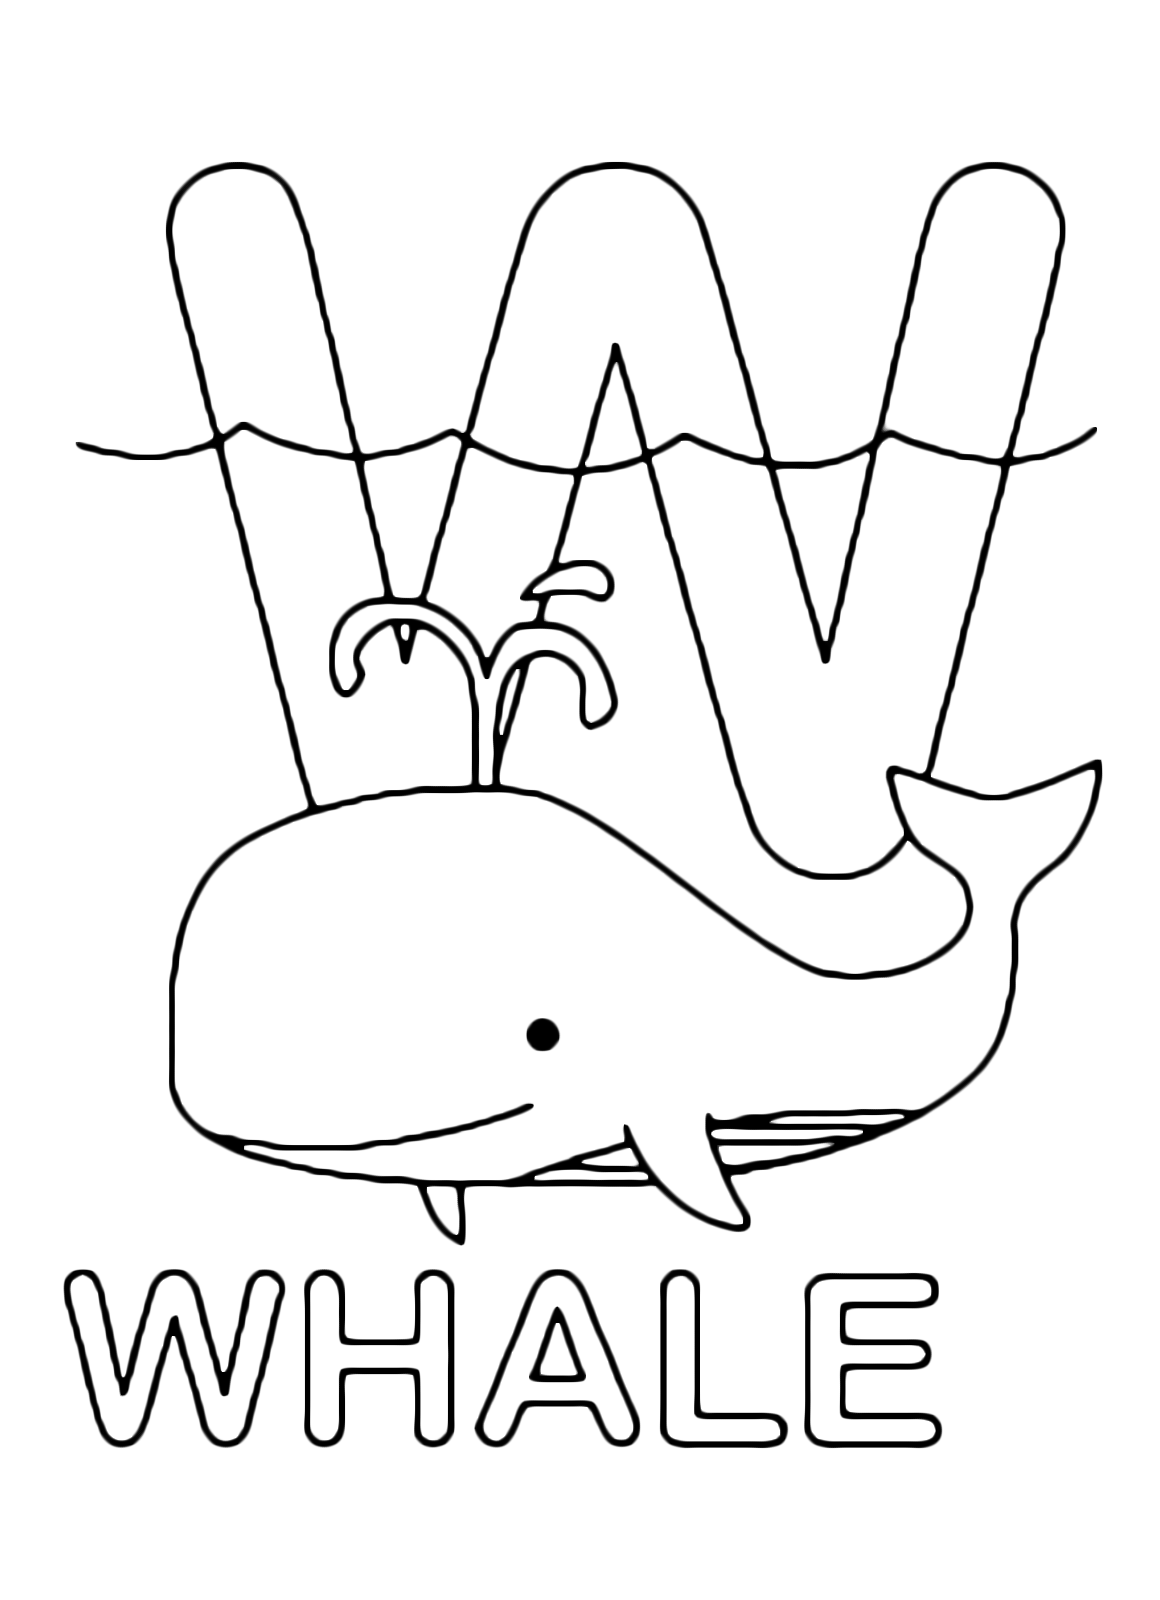 Letters and numbers - W for whale uppercase letter